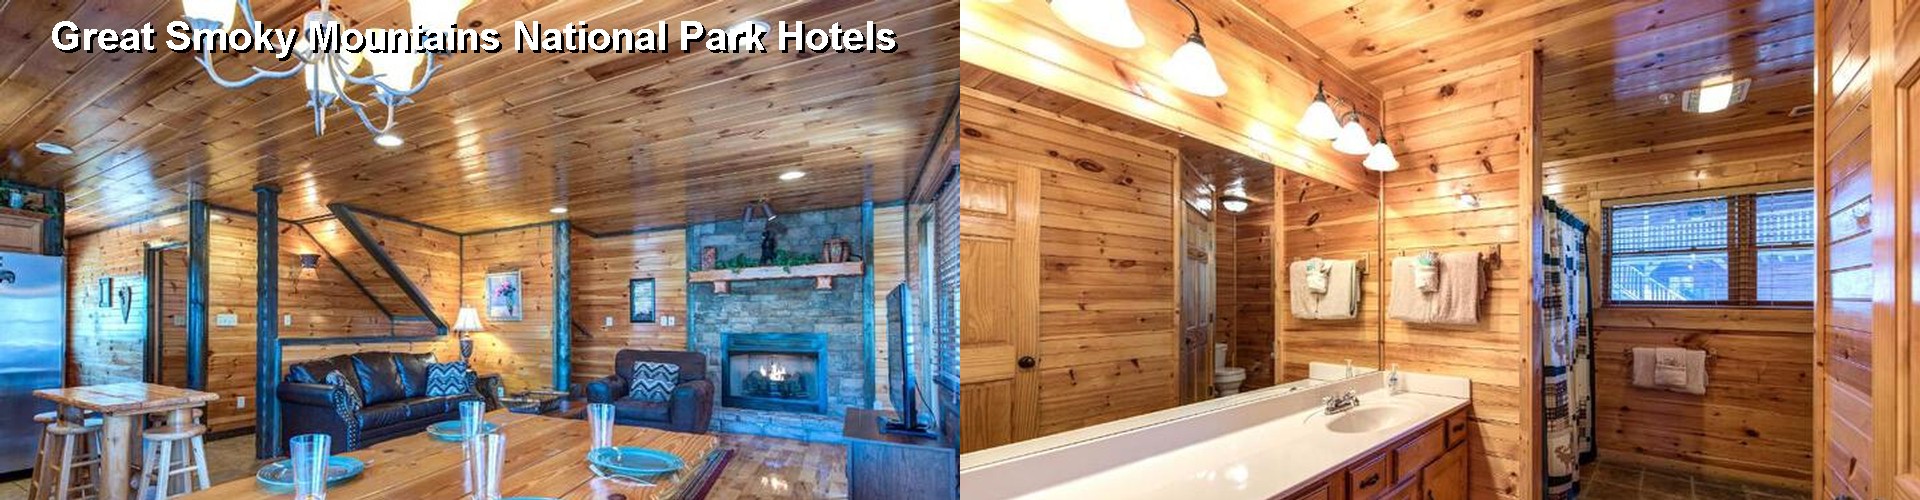 5 Best Hotels near Great Smoky Mountains National Park